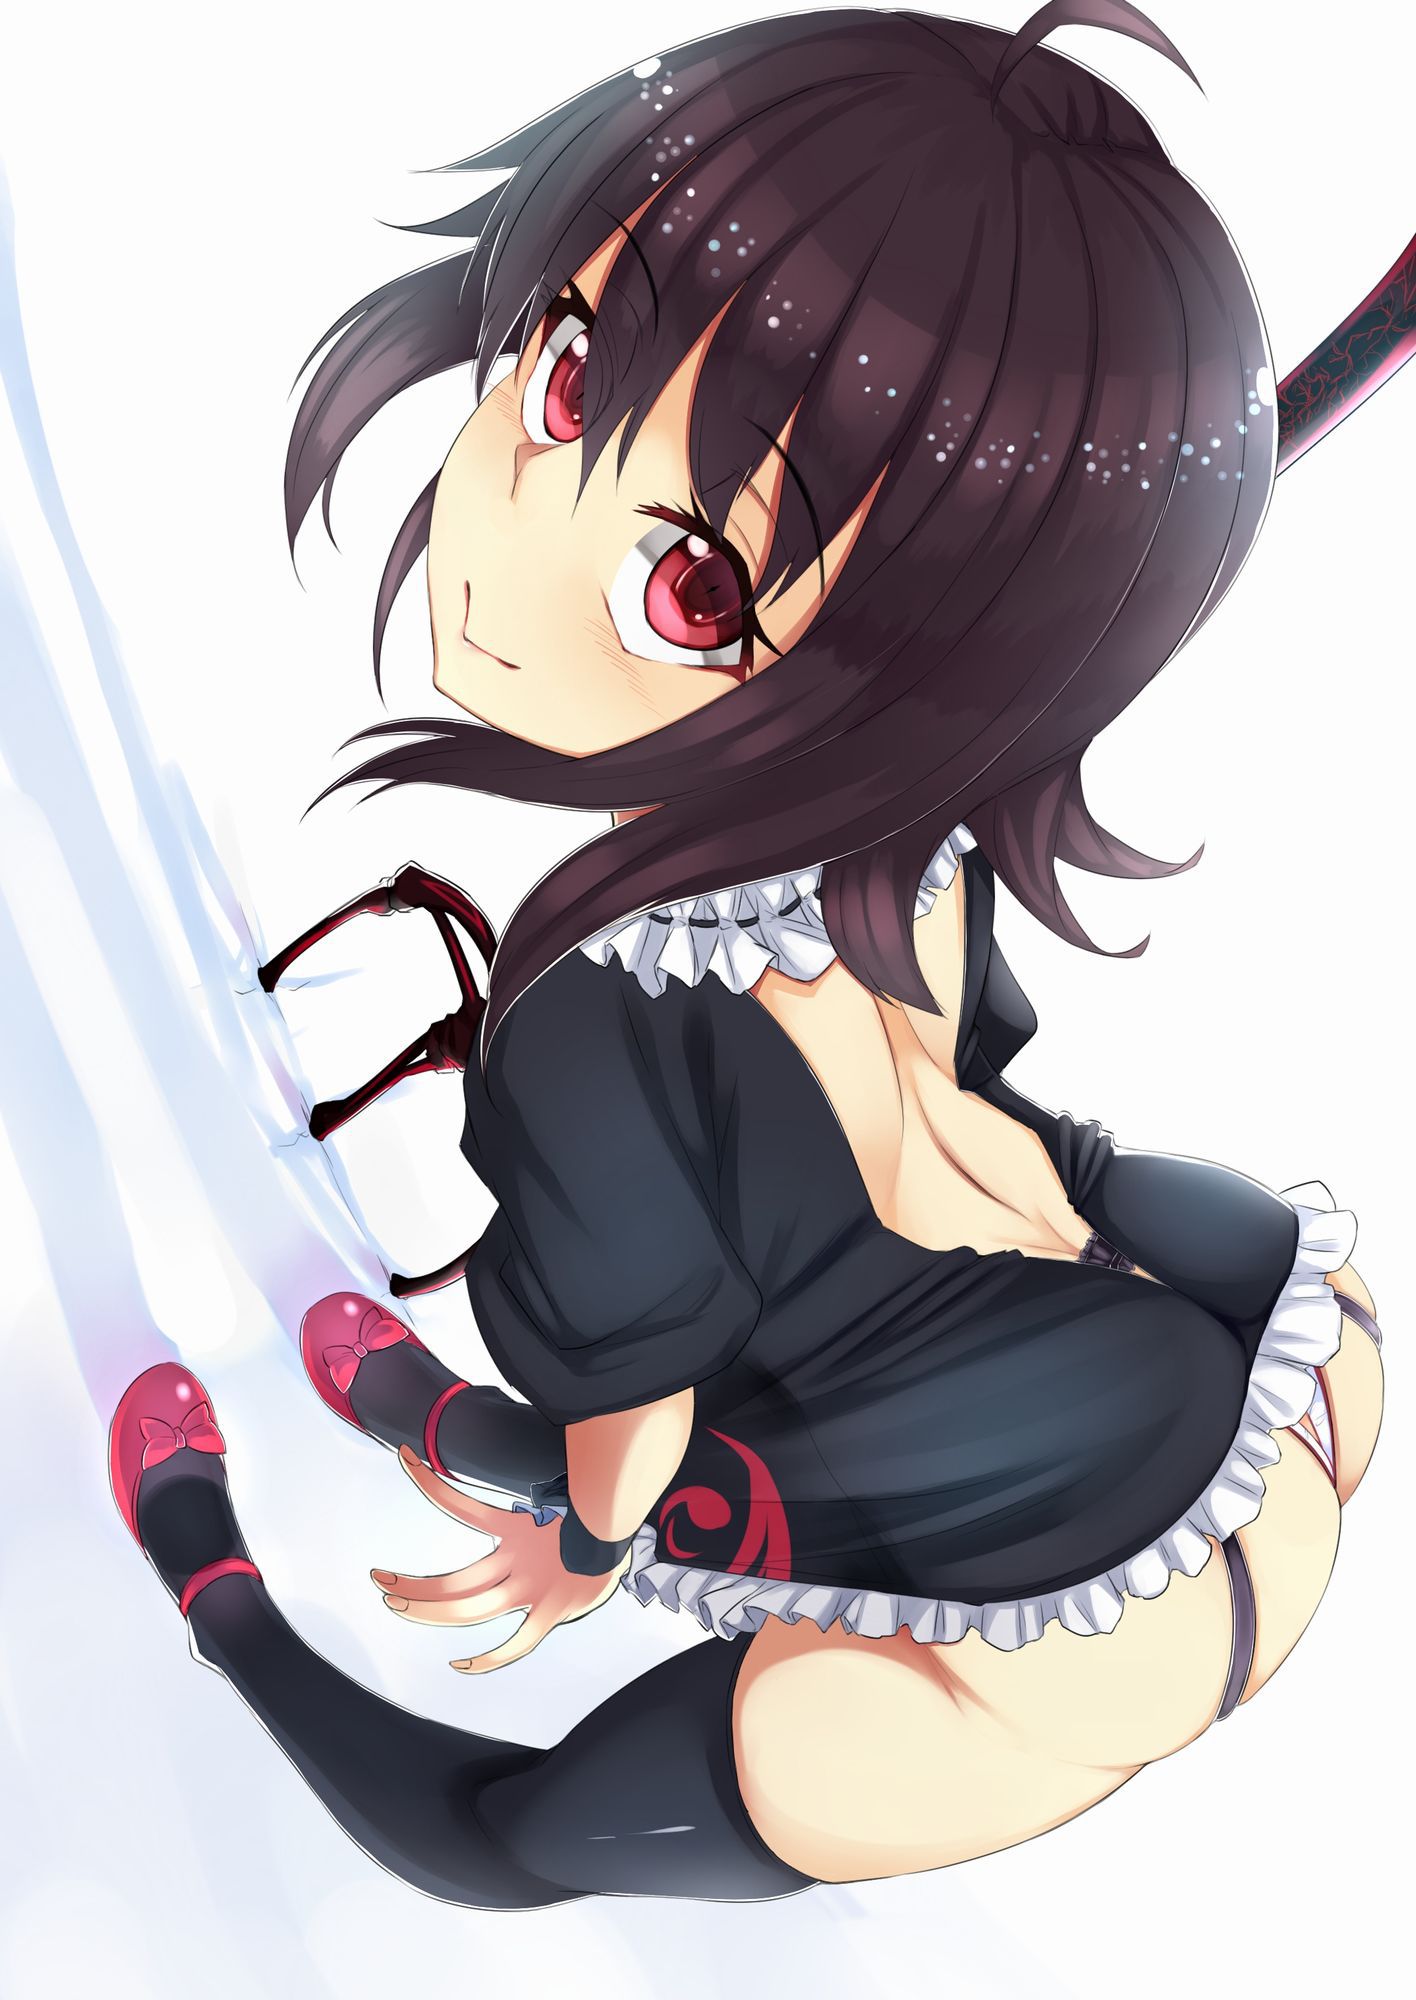 【Feudal Beast Nue-chan】Secondary erotic image of the unidentified but cute black-haired loli girl Feudal Beast Nue-chan of the Touhou Project 56